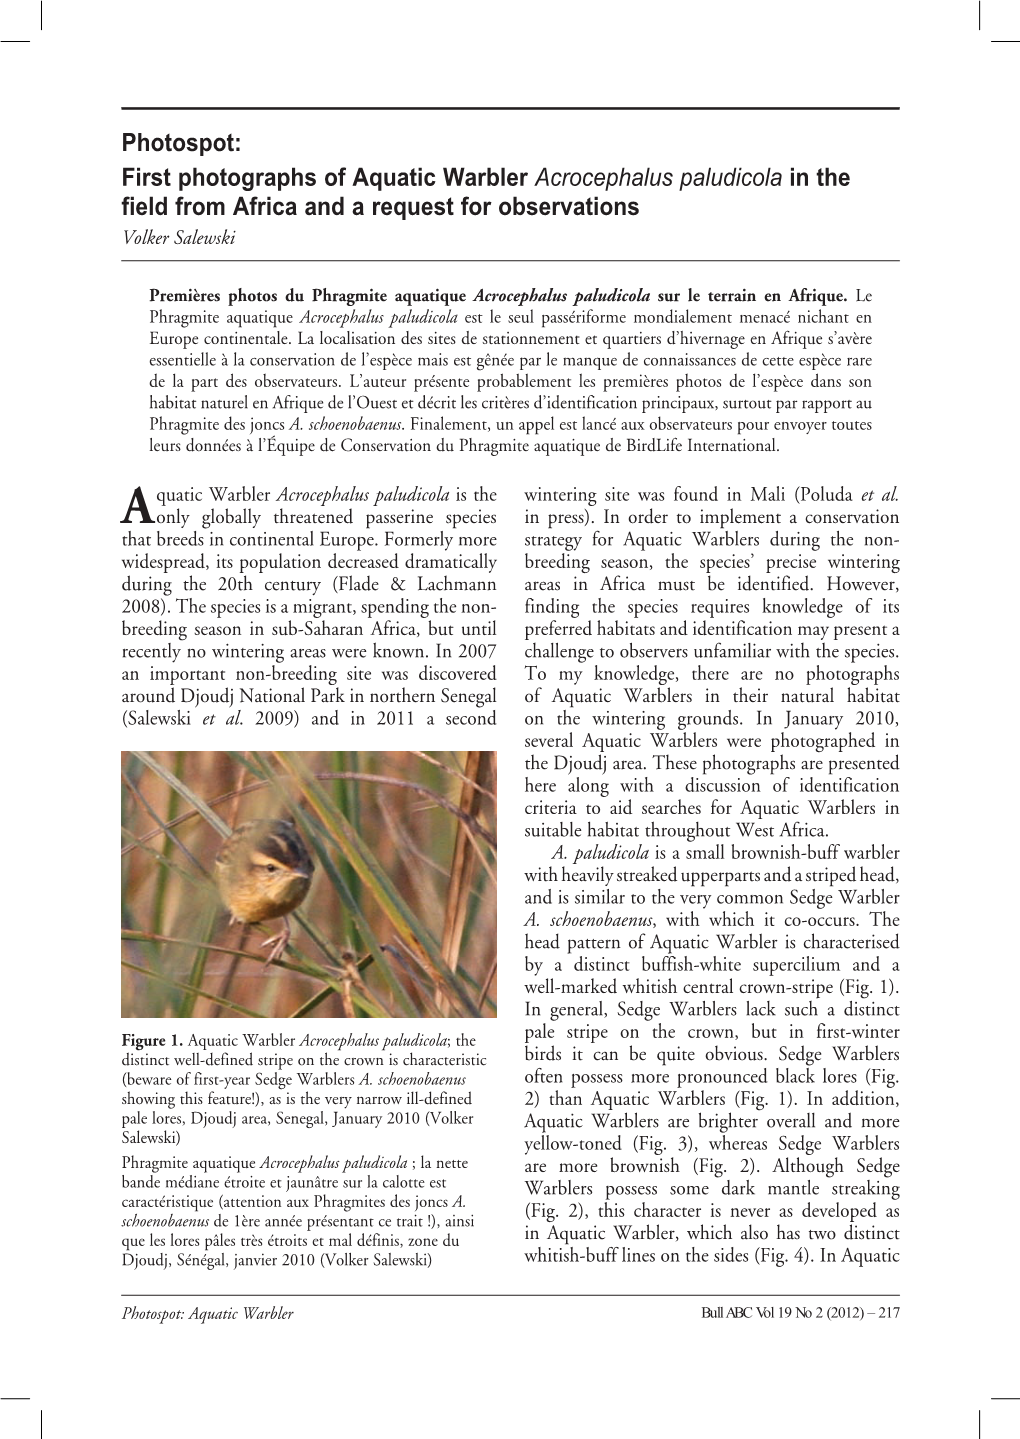 First Photographs of Aquatic Warbler Acrocephalus Paludicola in the Field from Africa and a Request for Observations Volker Salewski